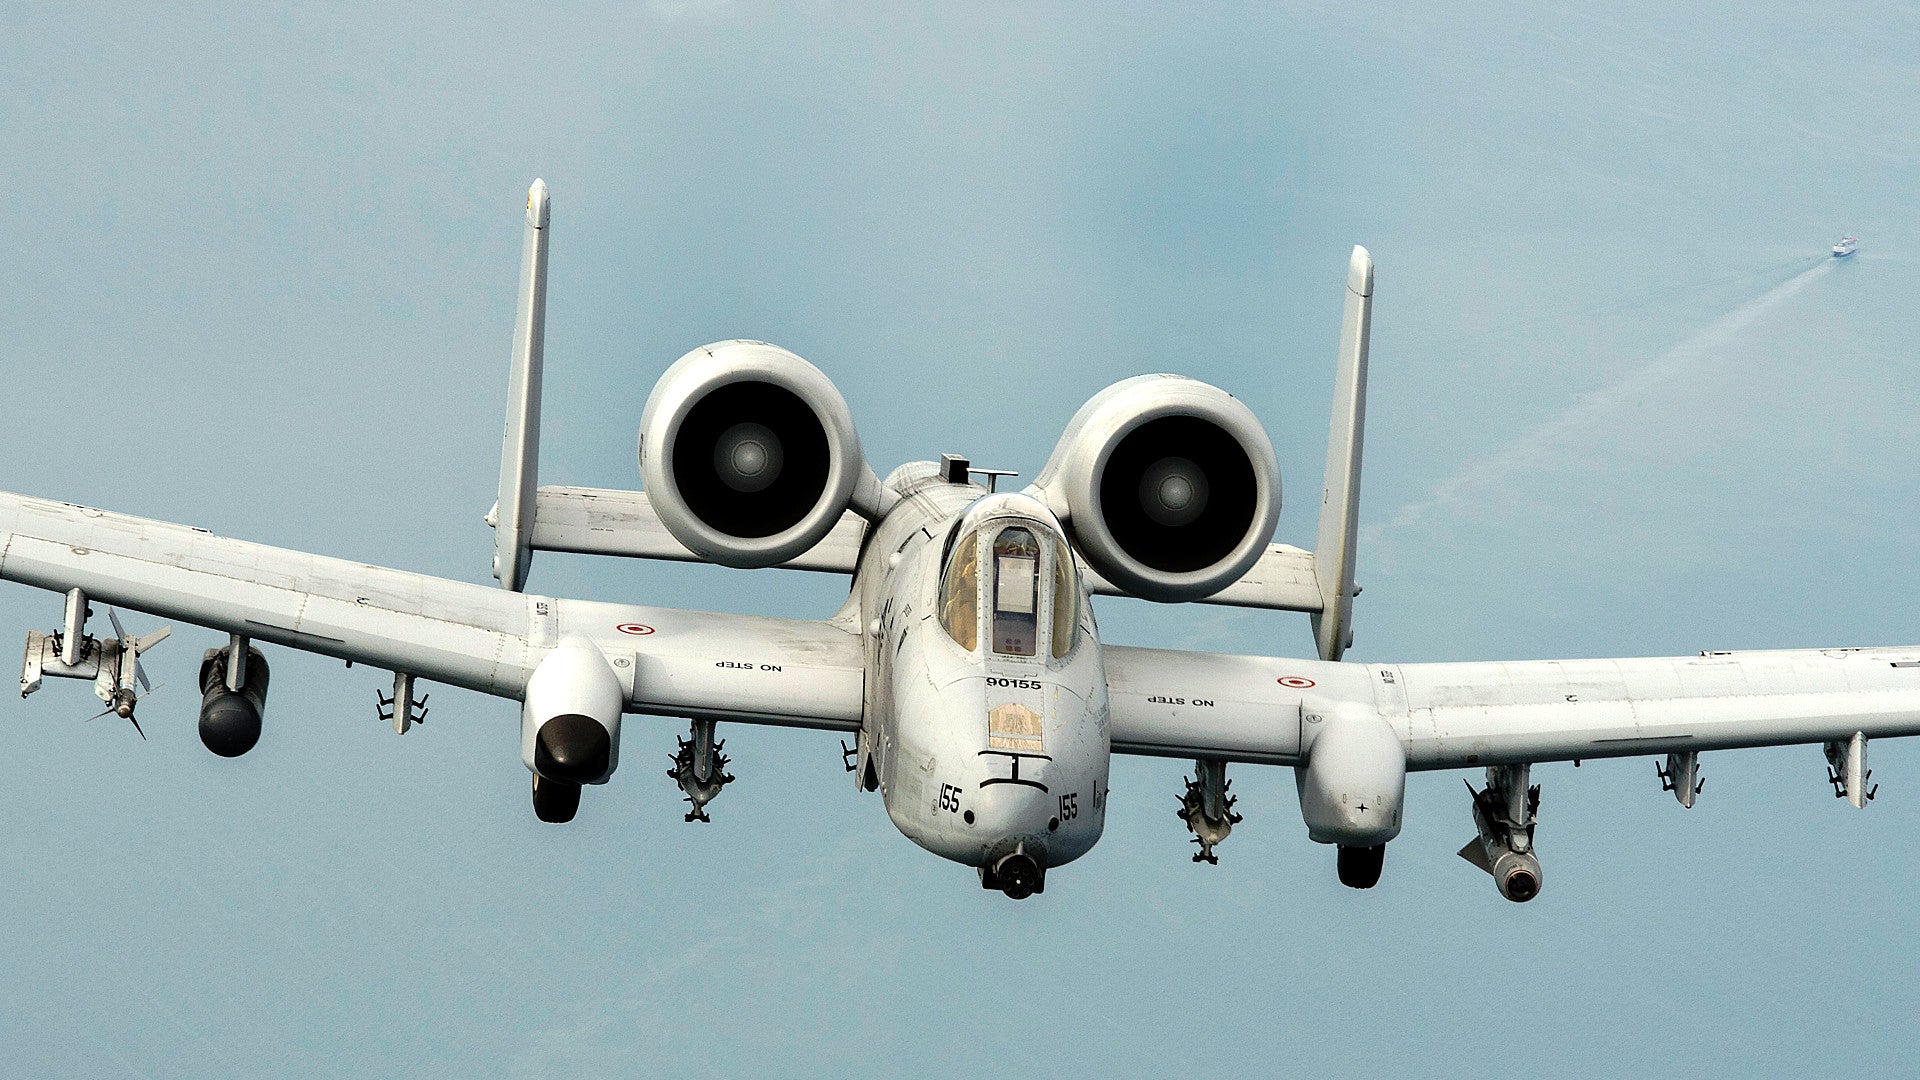 USAF Official in Charge of A-10s Says Re-Wing Program Is “Not Going to Happen”